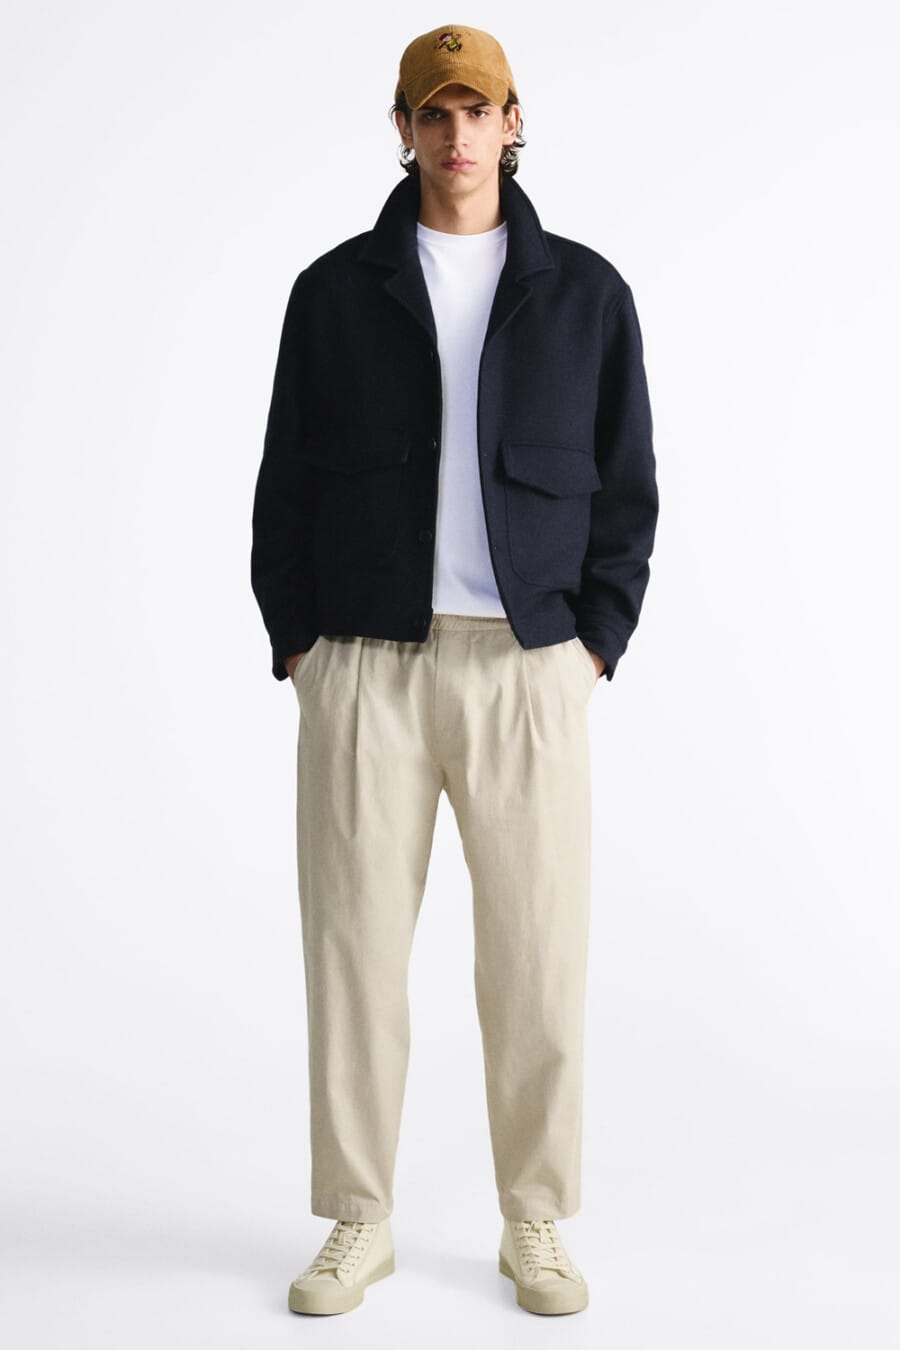 Men's wide-leg beige pleated pants, white T-shirt, navy wool blouson jacket, ta baseball cap and beige canvas high-top sneakers outfit